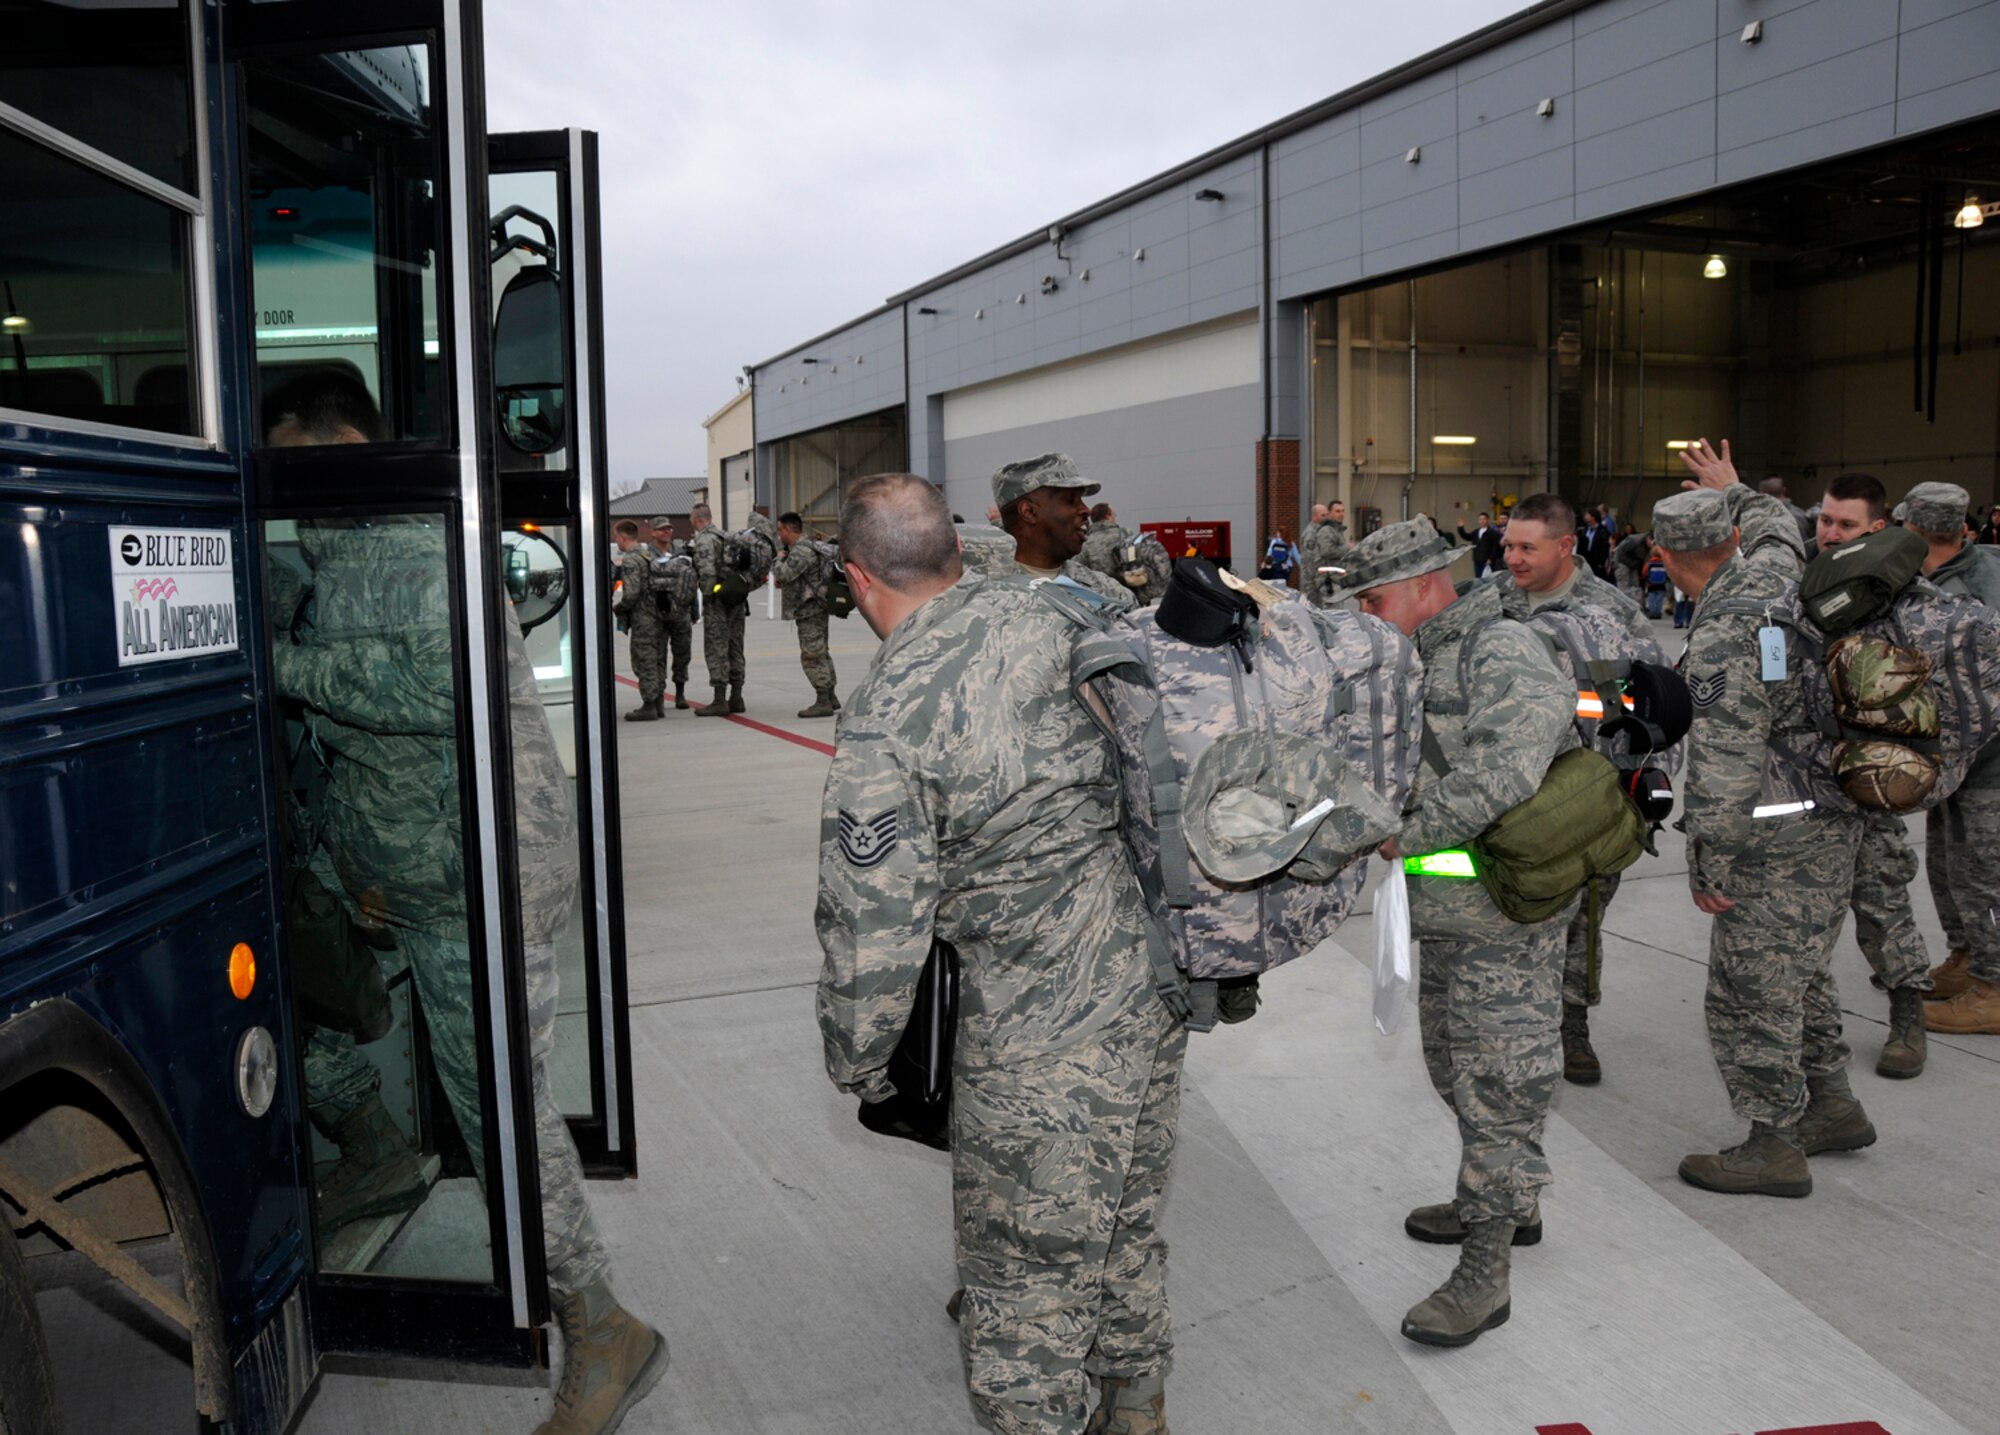 Members of the 188th Fighter Wing prepare to depart for an Aerospace Expeditionary Forces deployment March 8, 2010, at Fort Smith, Ark. The 188th will be deployed to Kandahar, Afghanistan, for more than two months. The 188th will be attached to the 451st Expeditionary Wing while at Kandahar Airfield. This marks the 188th's first combat deployment with the A-10 Thunderbolt II "Warthog."  (U.S. Air Force photo by Technical Sgt Stephen M. Hornsey/188th Fighter Wing Public Affairs)